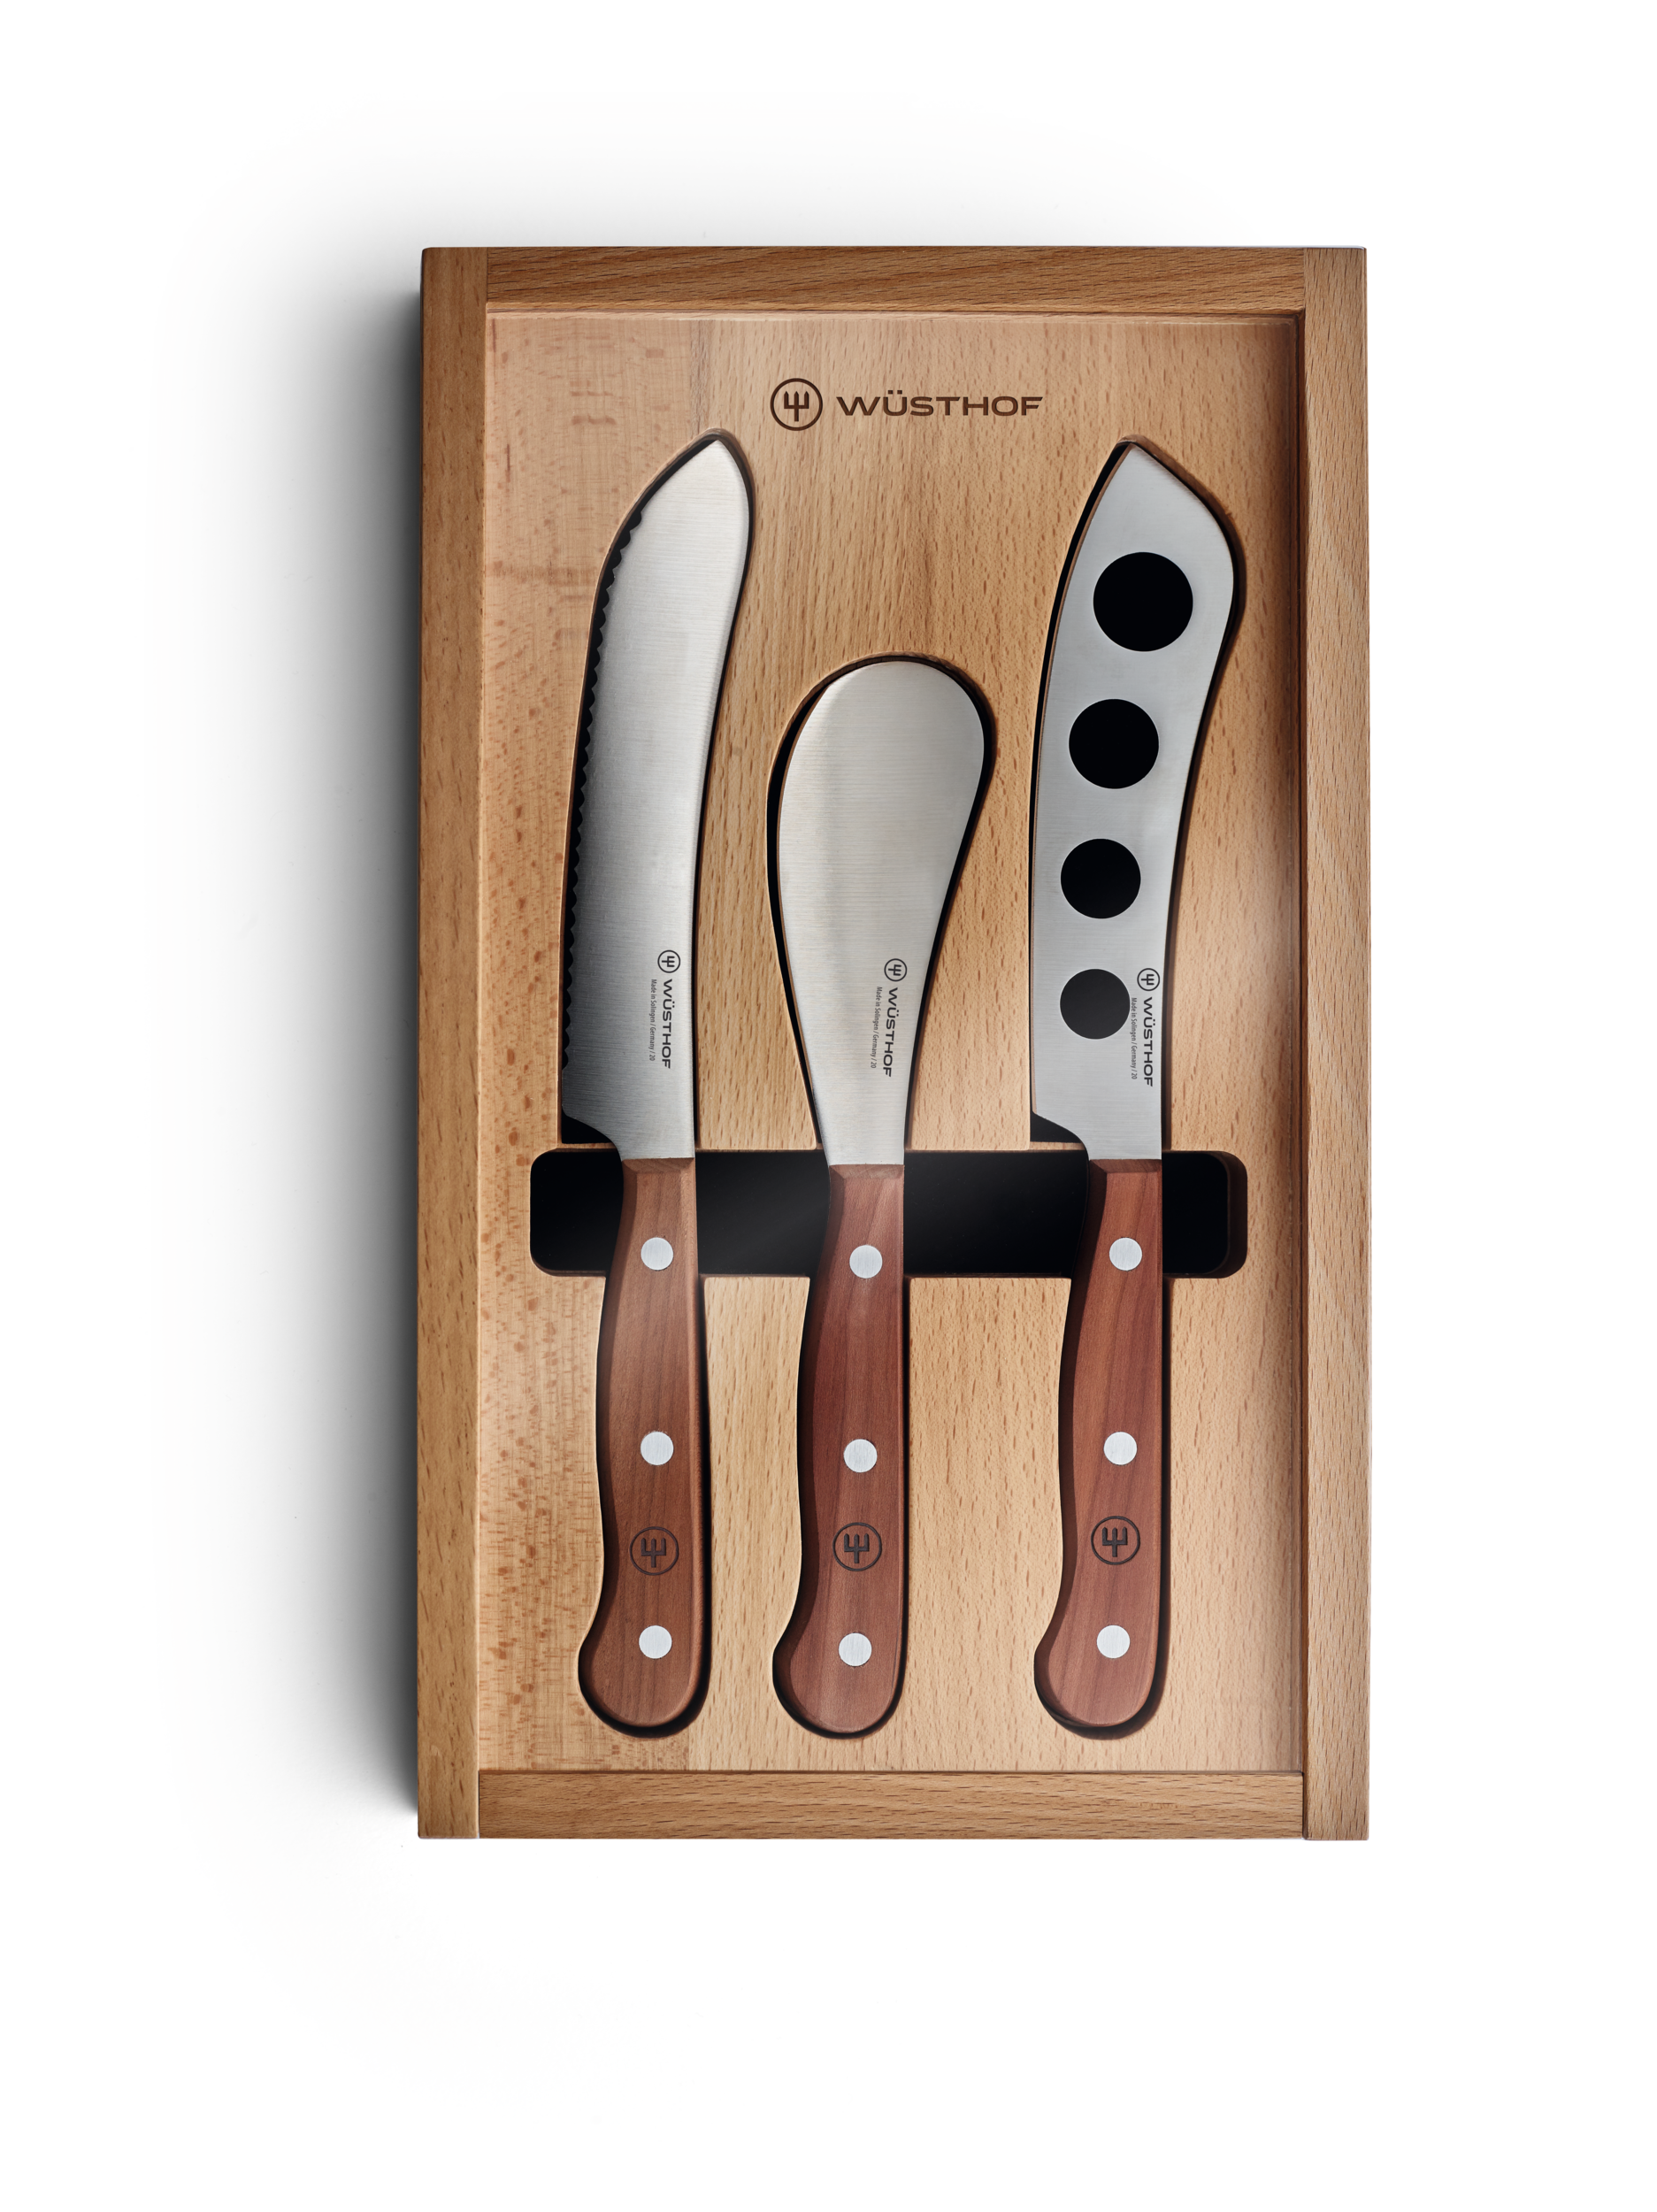 Wusthof 3 Piece Charcuterie Set with Plum Wood Handles